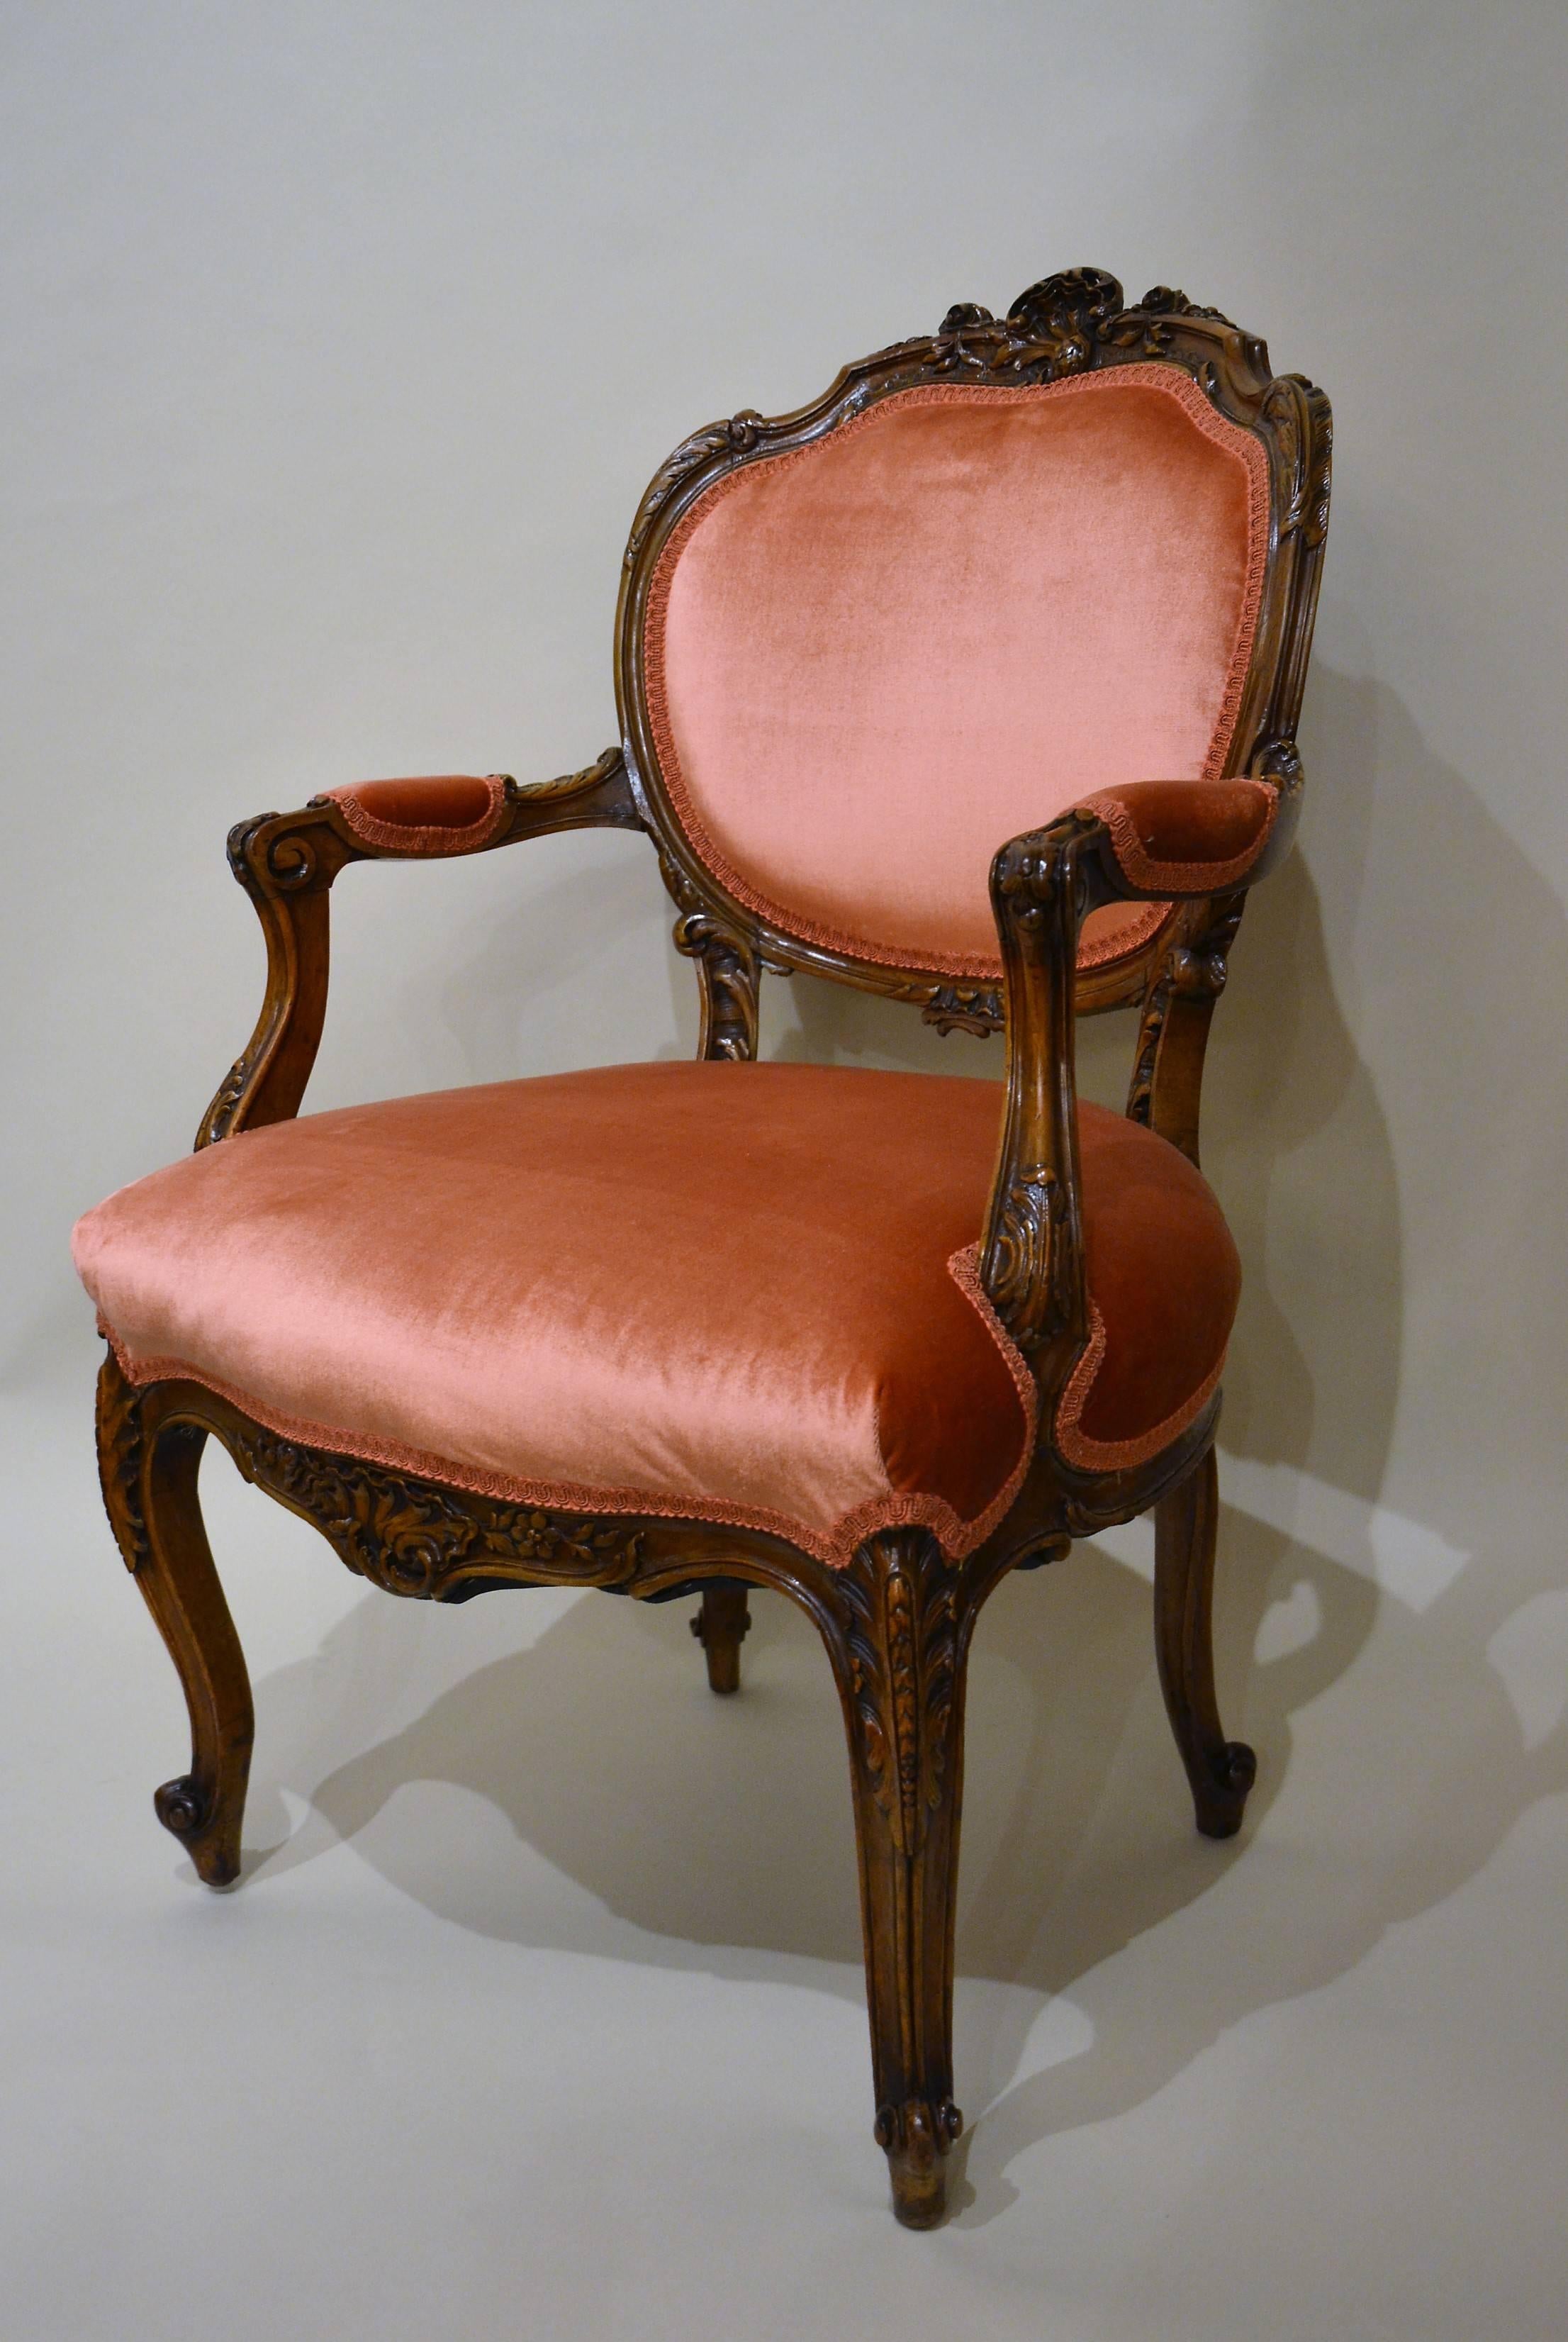 Pair of antique French sculpted walnut armchairs, circa 1875-1885.